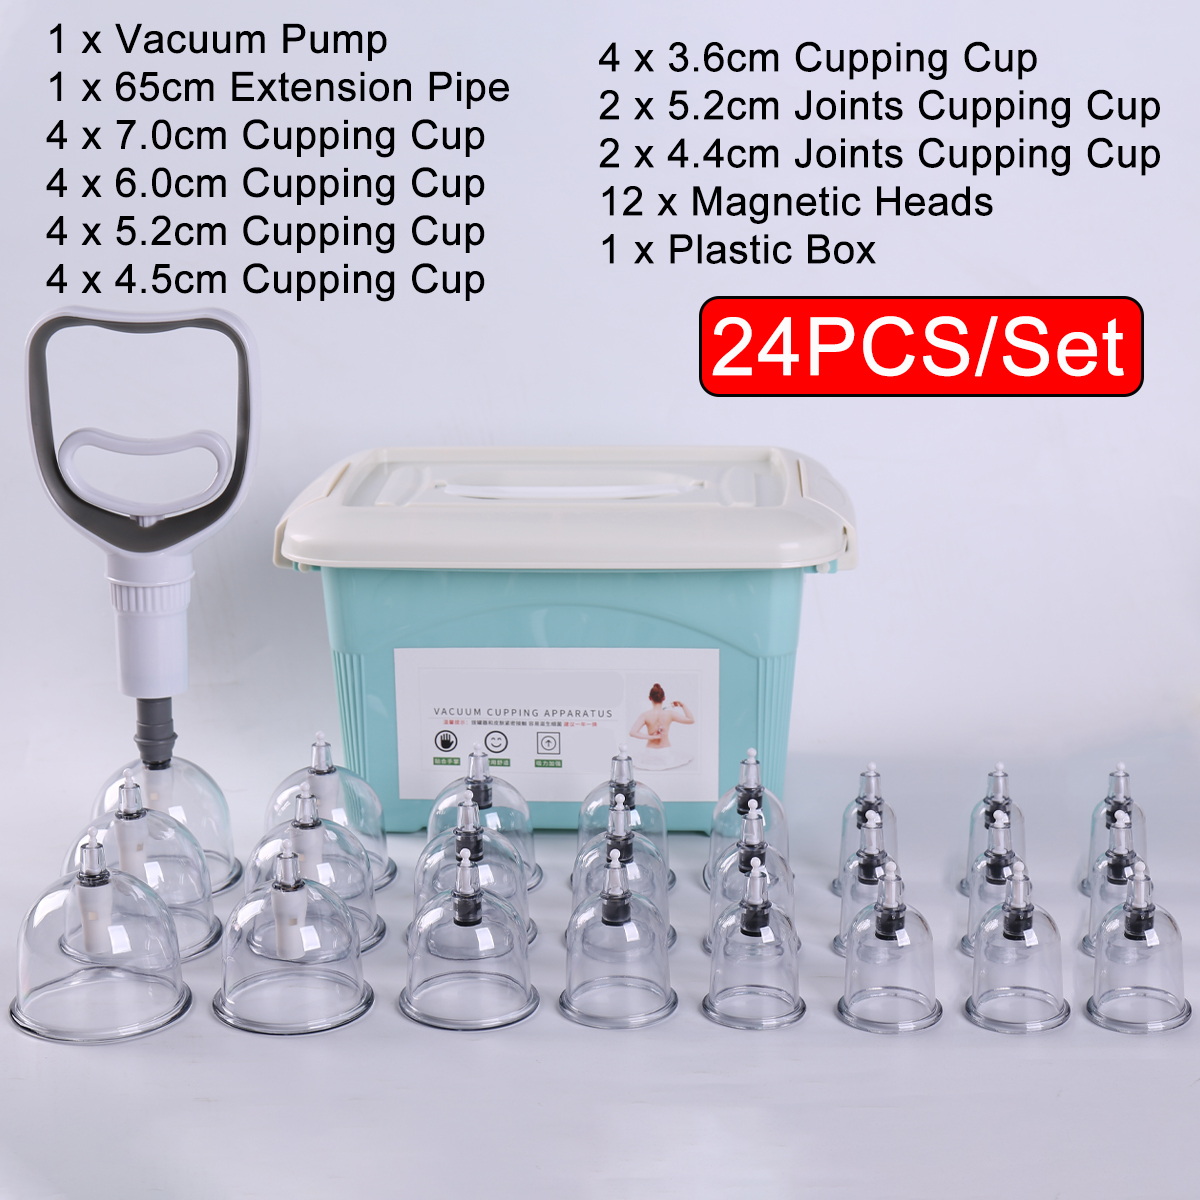 122432pcs-Medical-Chinese-Vacuum-Cupping-Body-Massage-Therapy-Healthy-Suction-Cupping-Massager-1893418-11